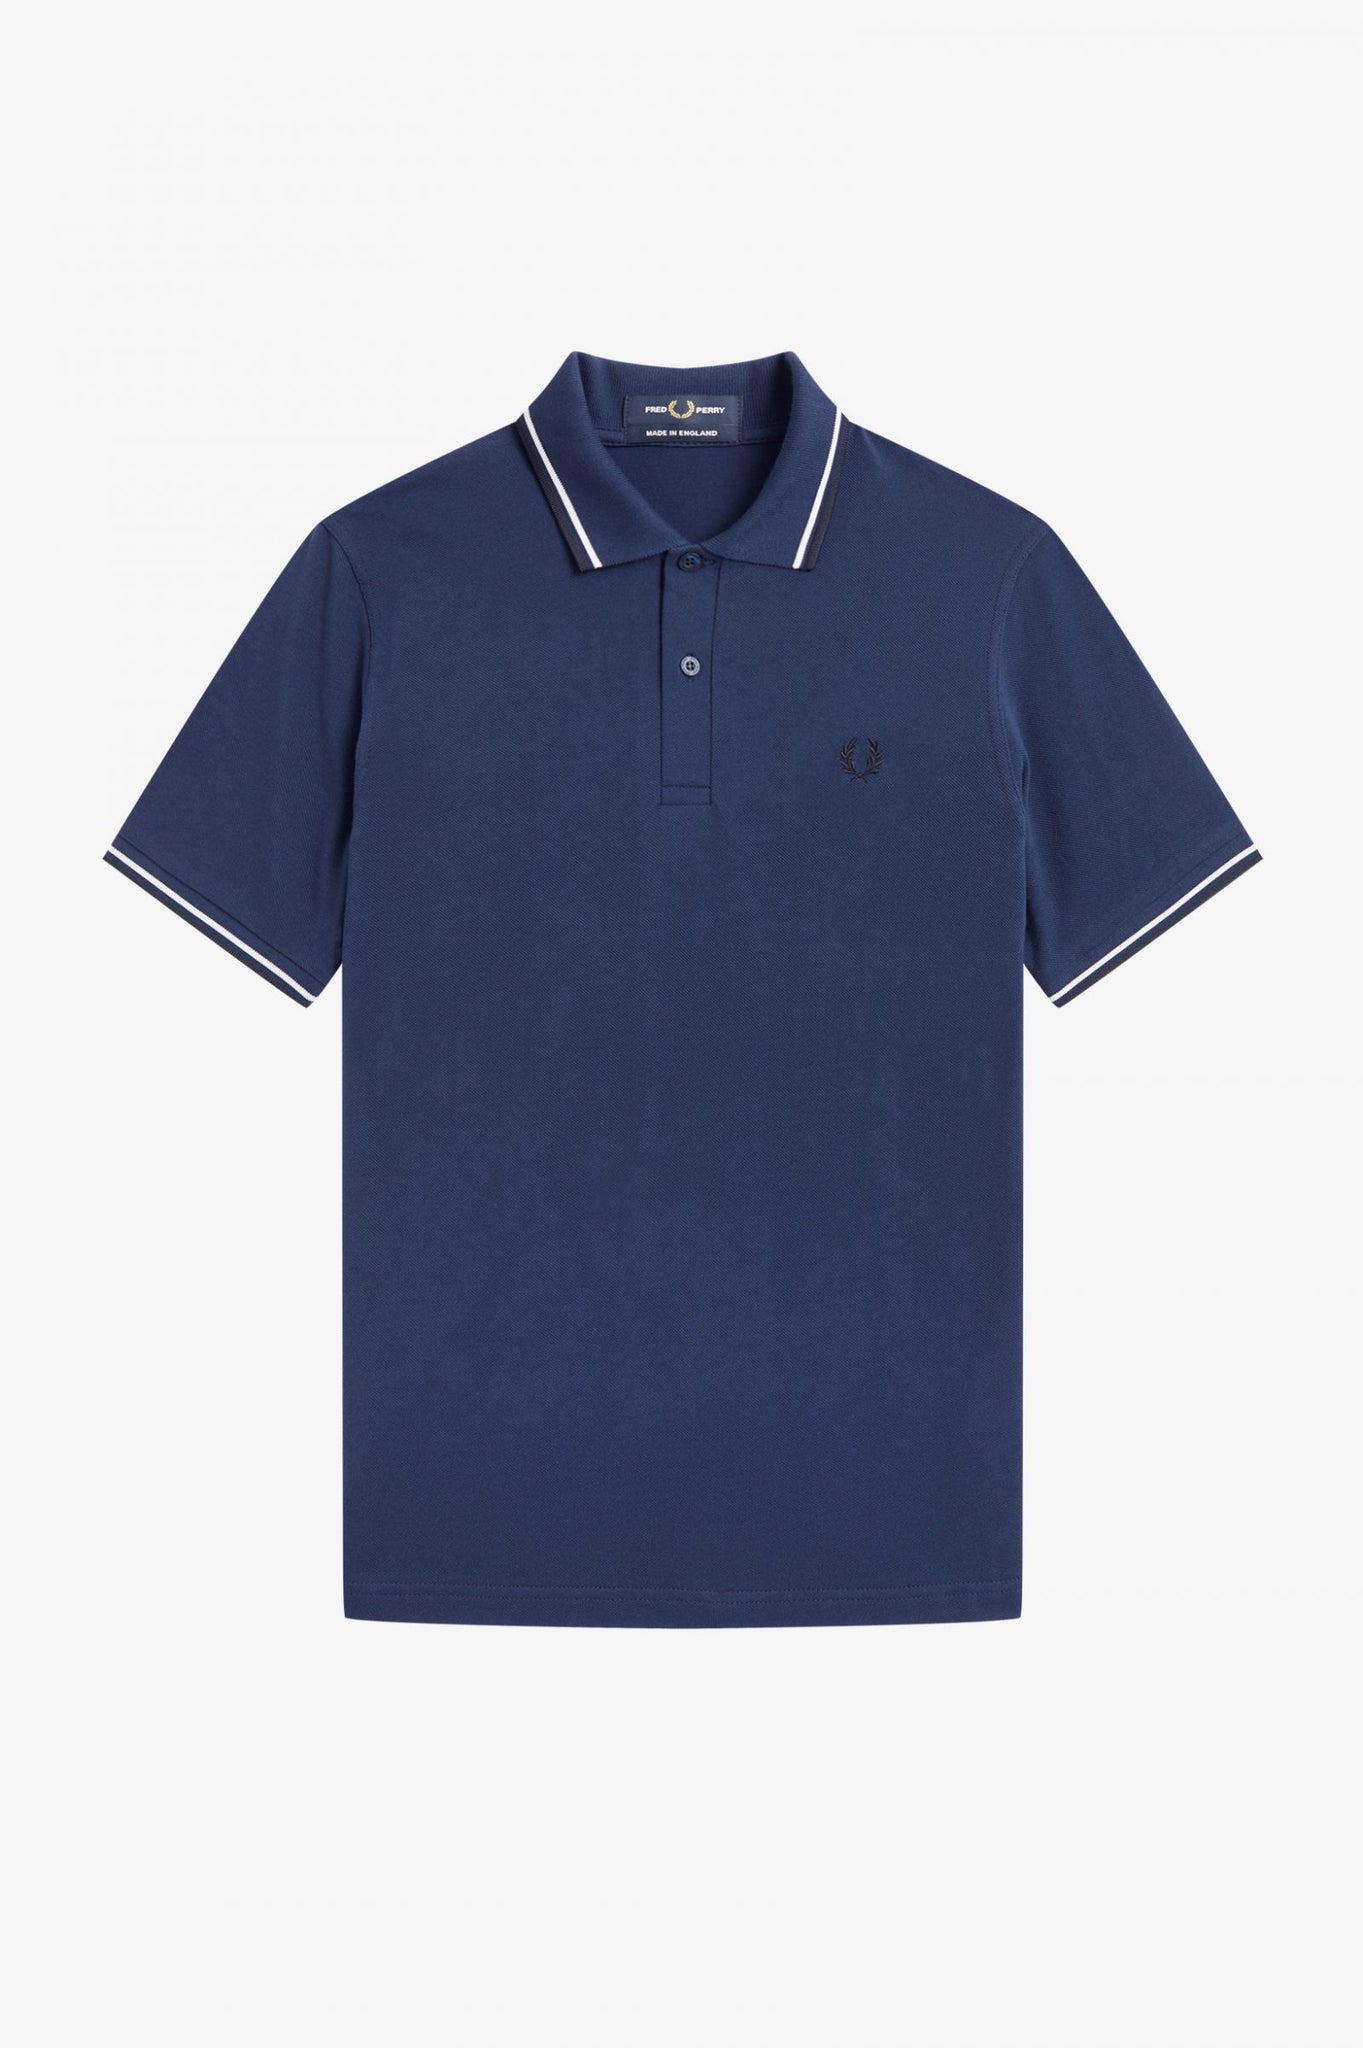 M12 TWIN TIPPED FRED PERRY POLO SHIRT - Q42 BLK/ECRU/NUT